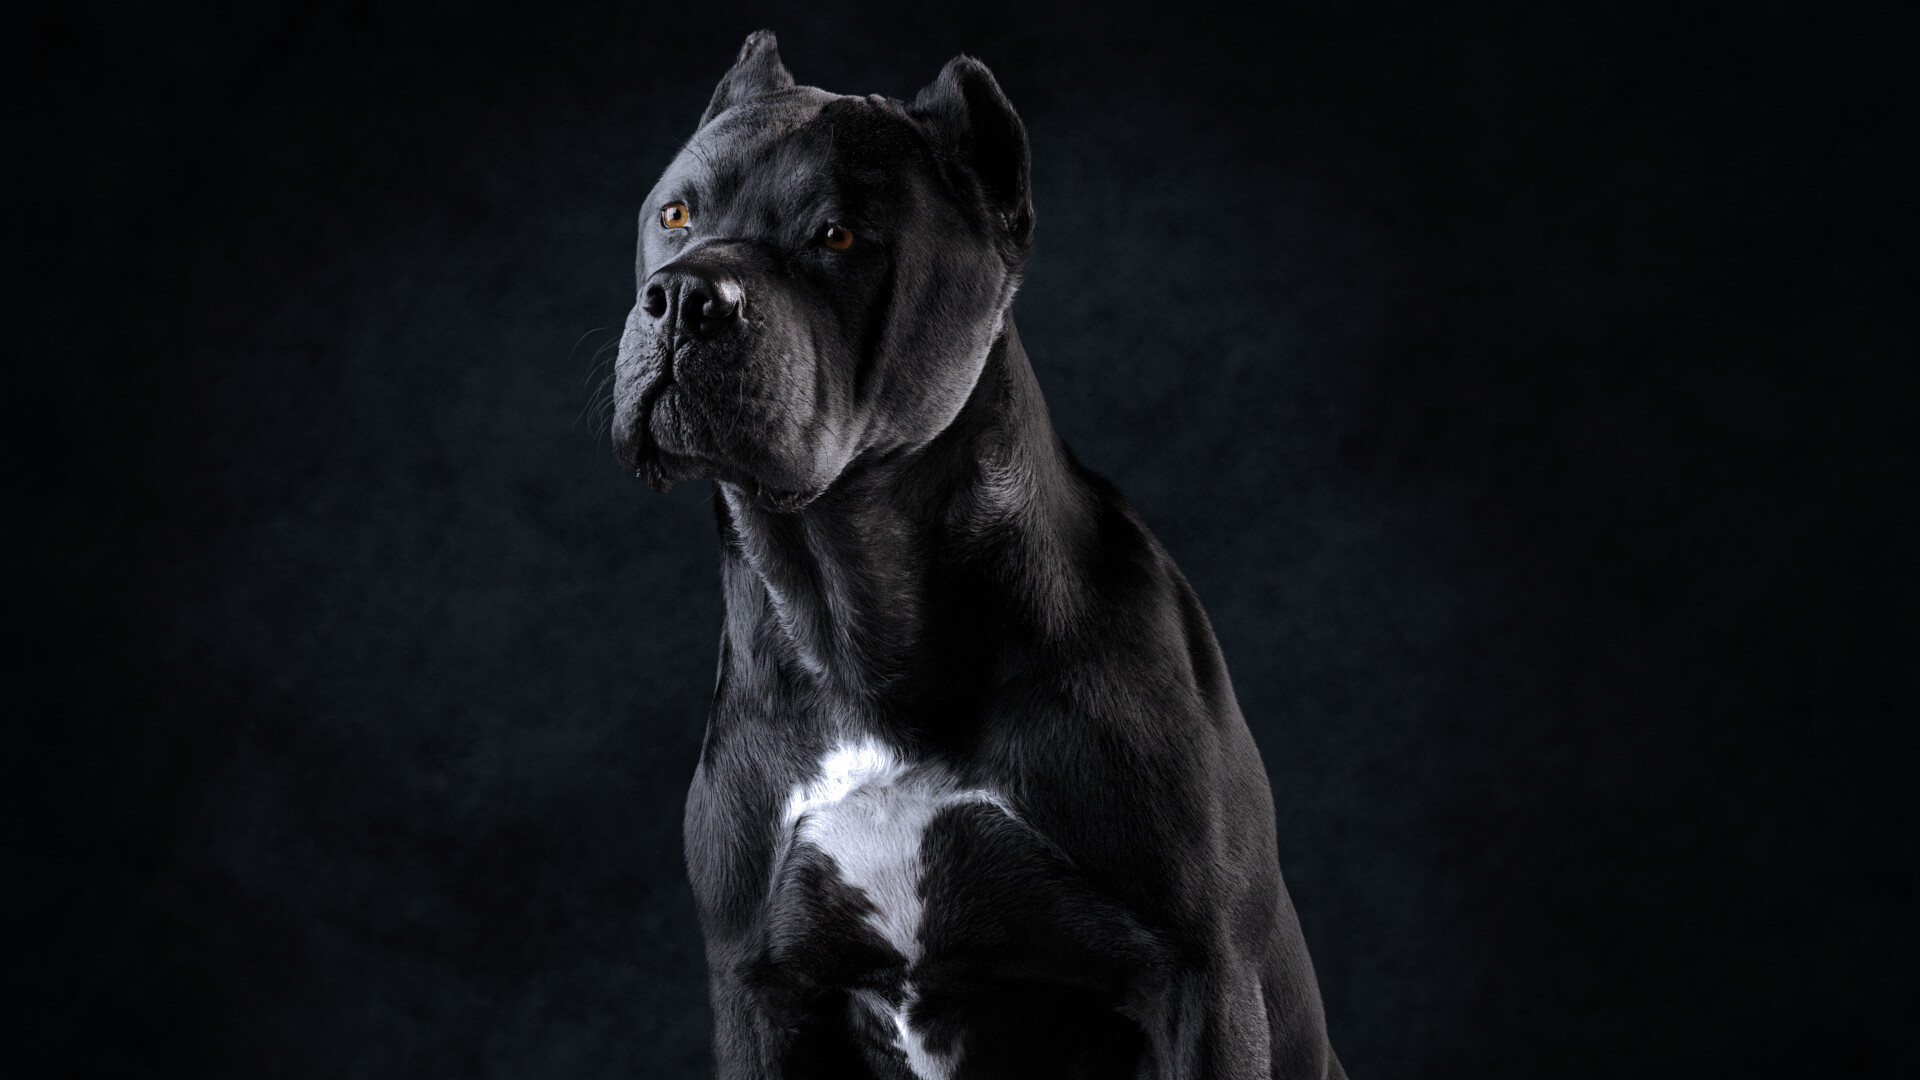 1080x1920  1080x1920 cane corso dog animals hd for Iphone 6 7 8  wallpaper  Coolwallpapersme